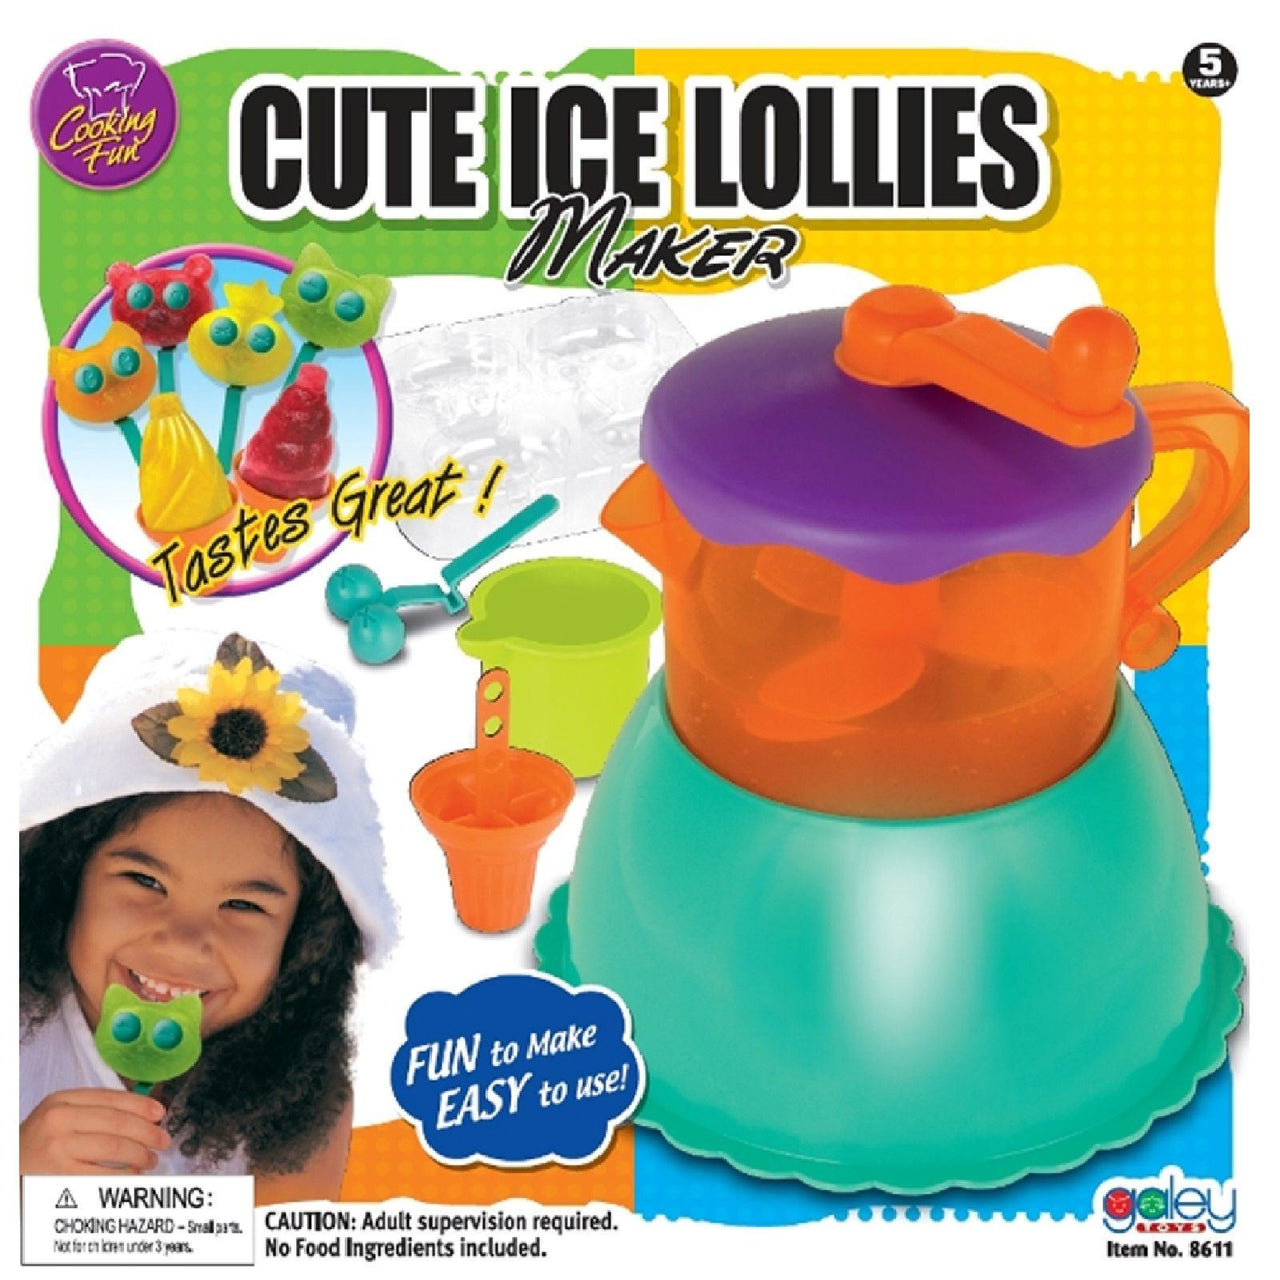 Galey Yummy Ice Lollies Maker